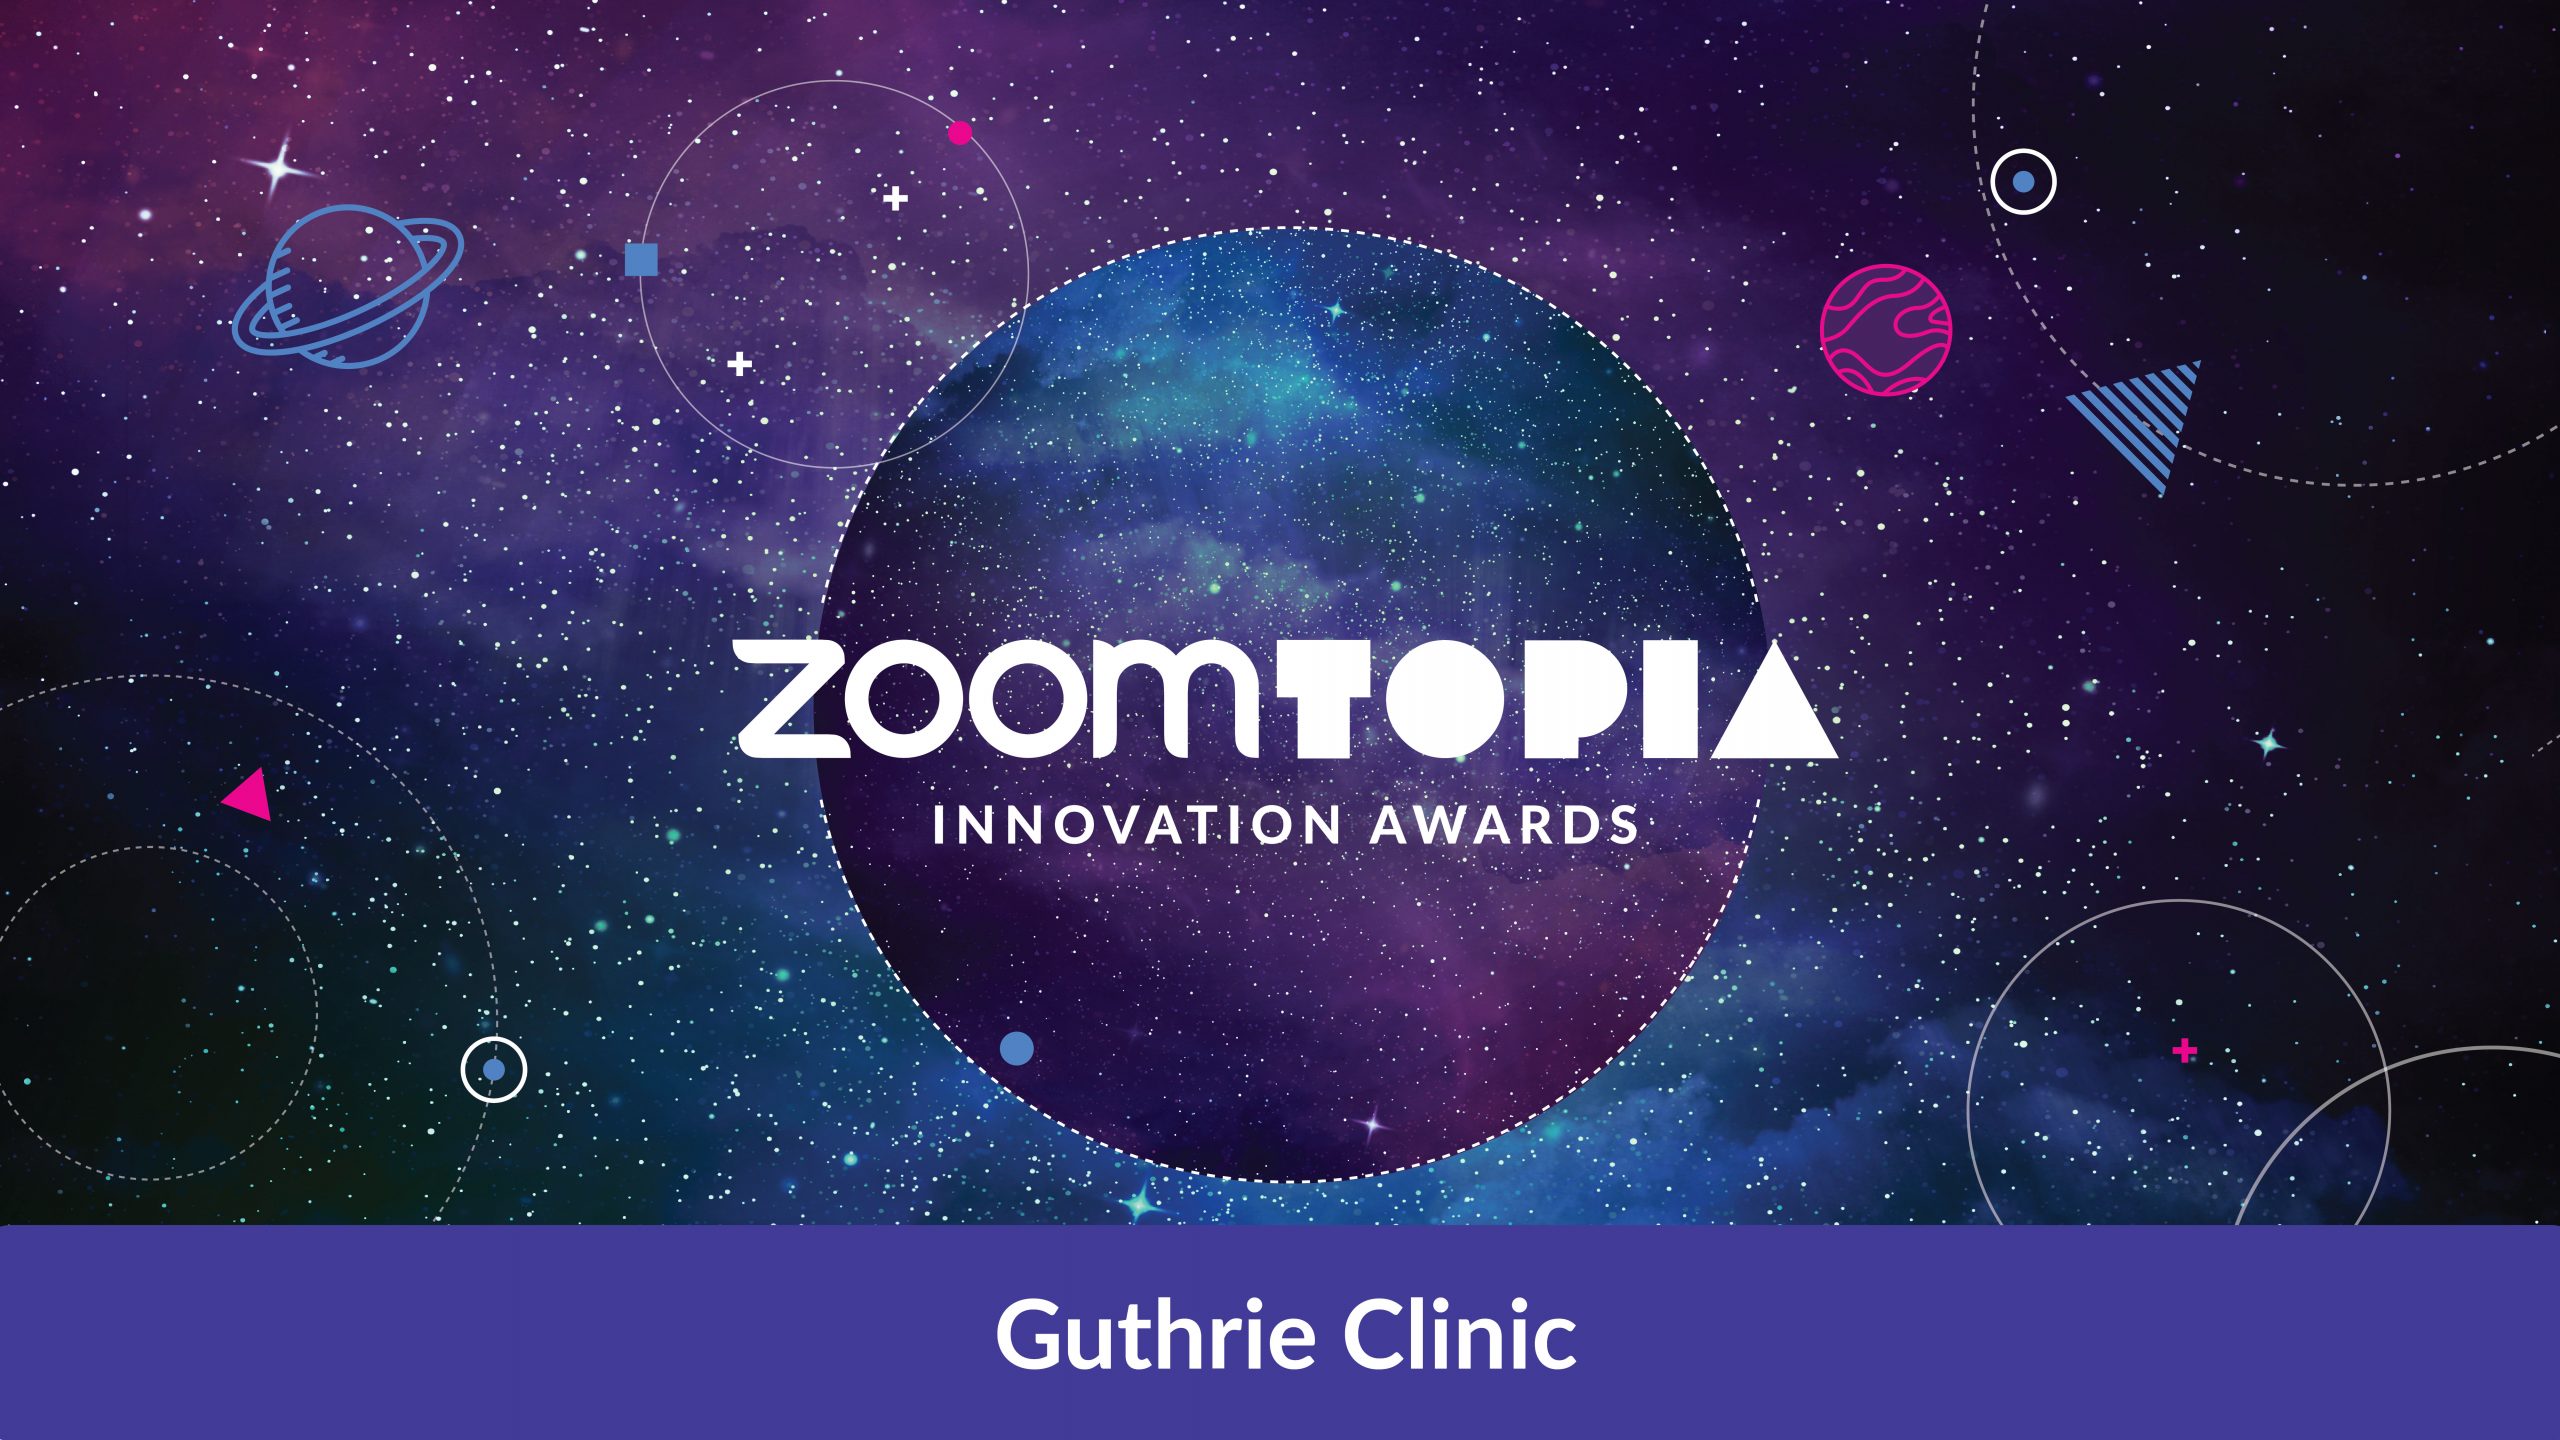 Zoomtopia Innovation Awards: Guthrie Clinic